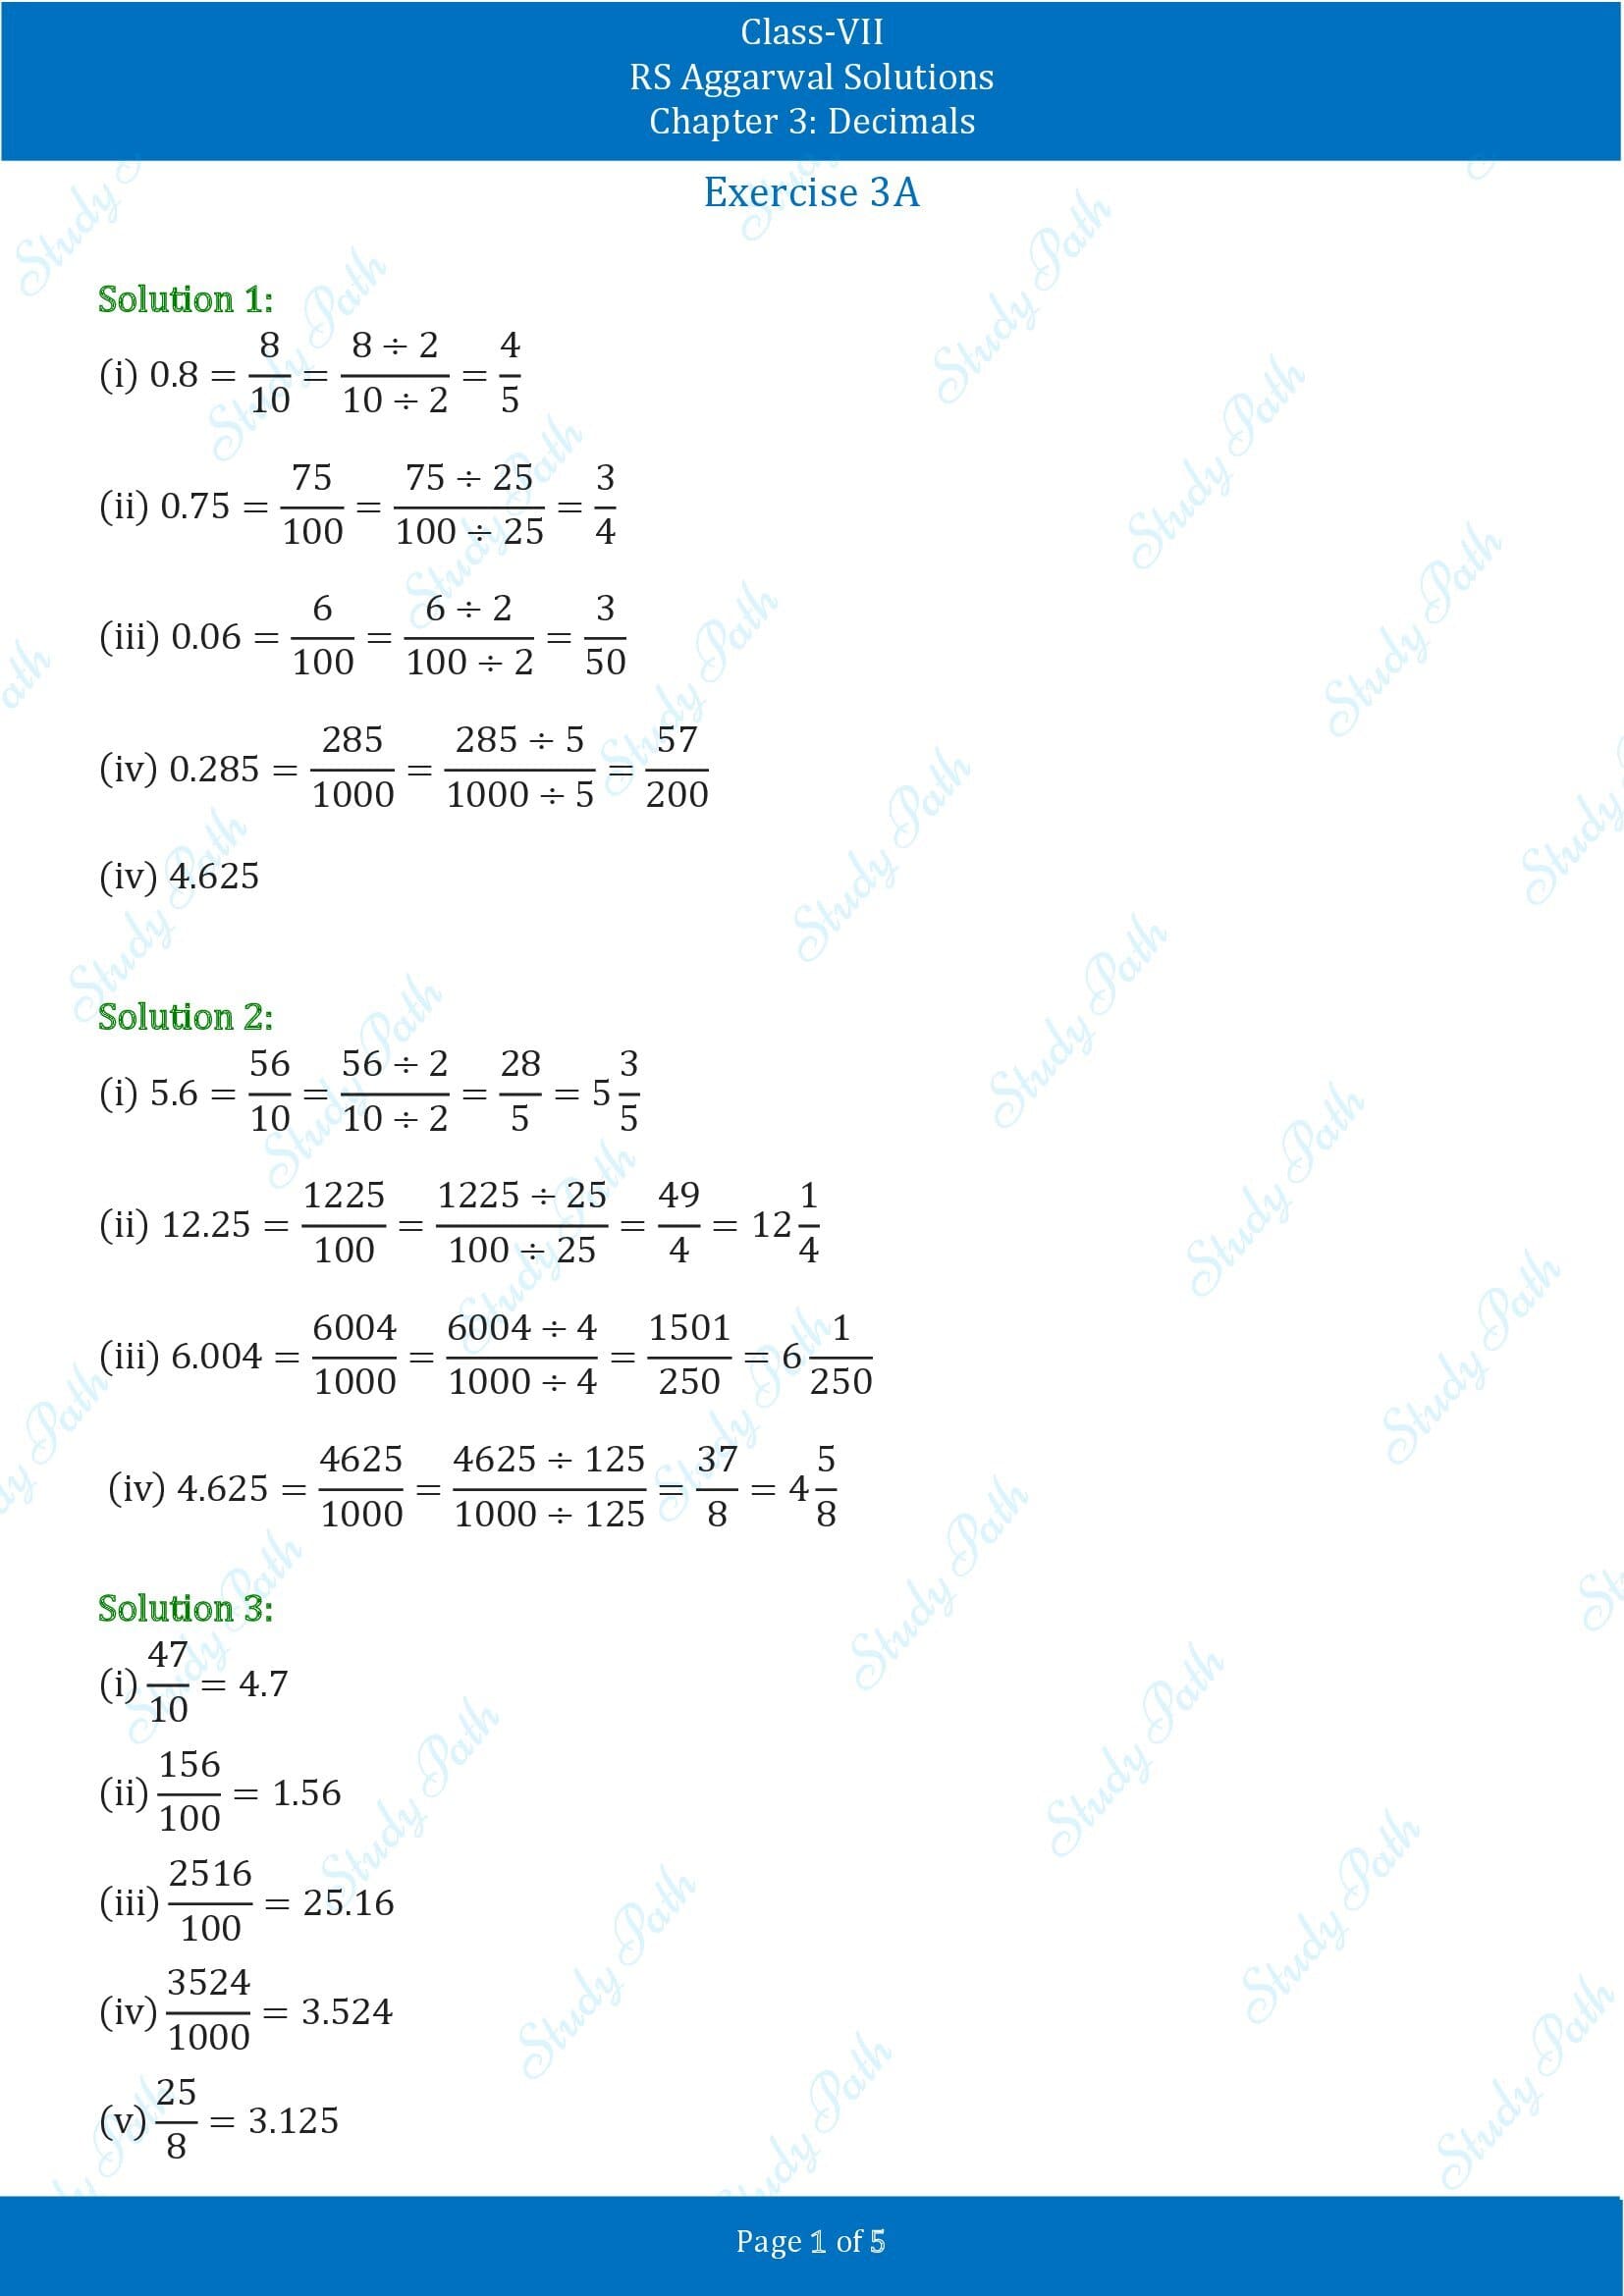 RS Aggarwal Solutions Class 7 Chapter 3 Decimals Exercise 3A 00001